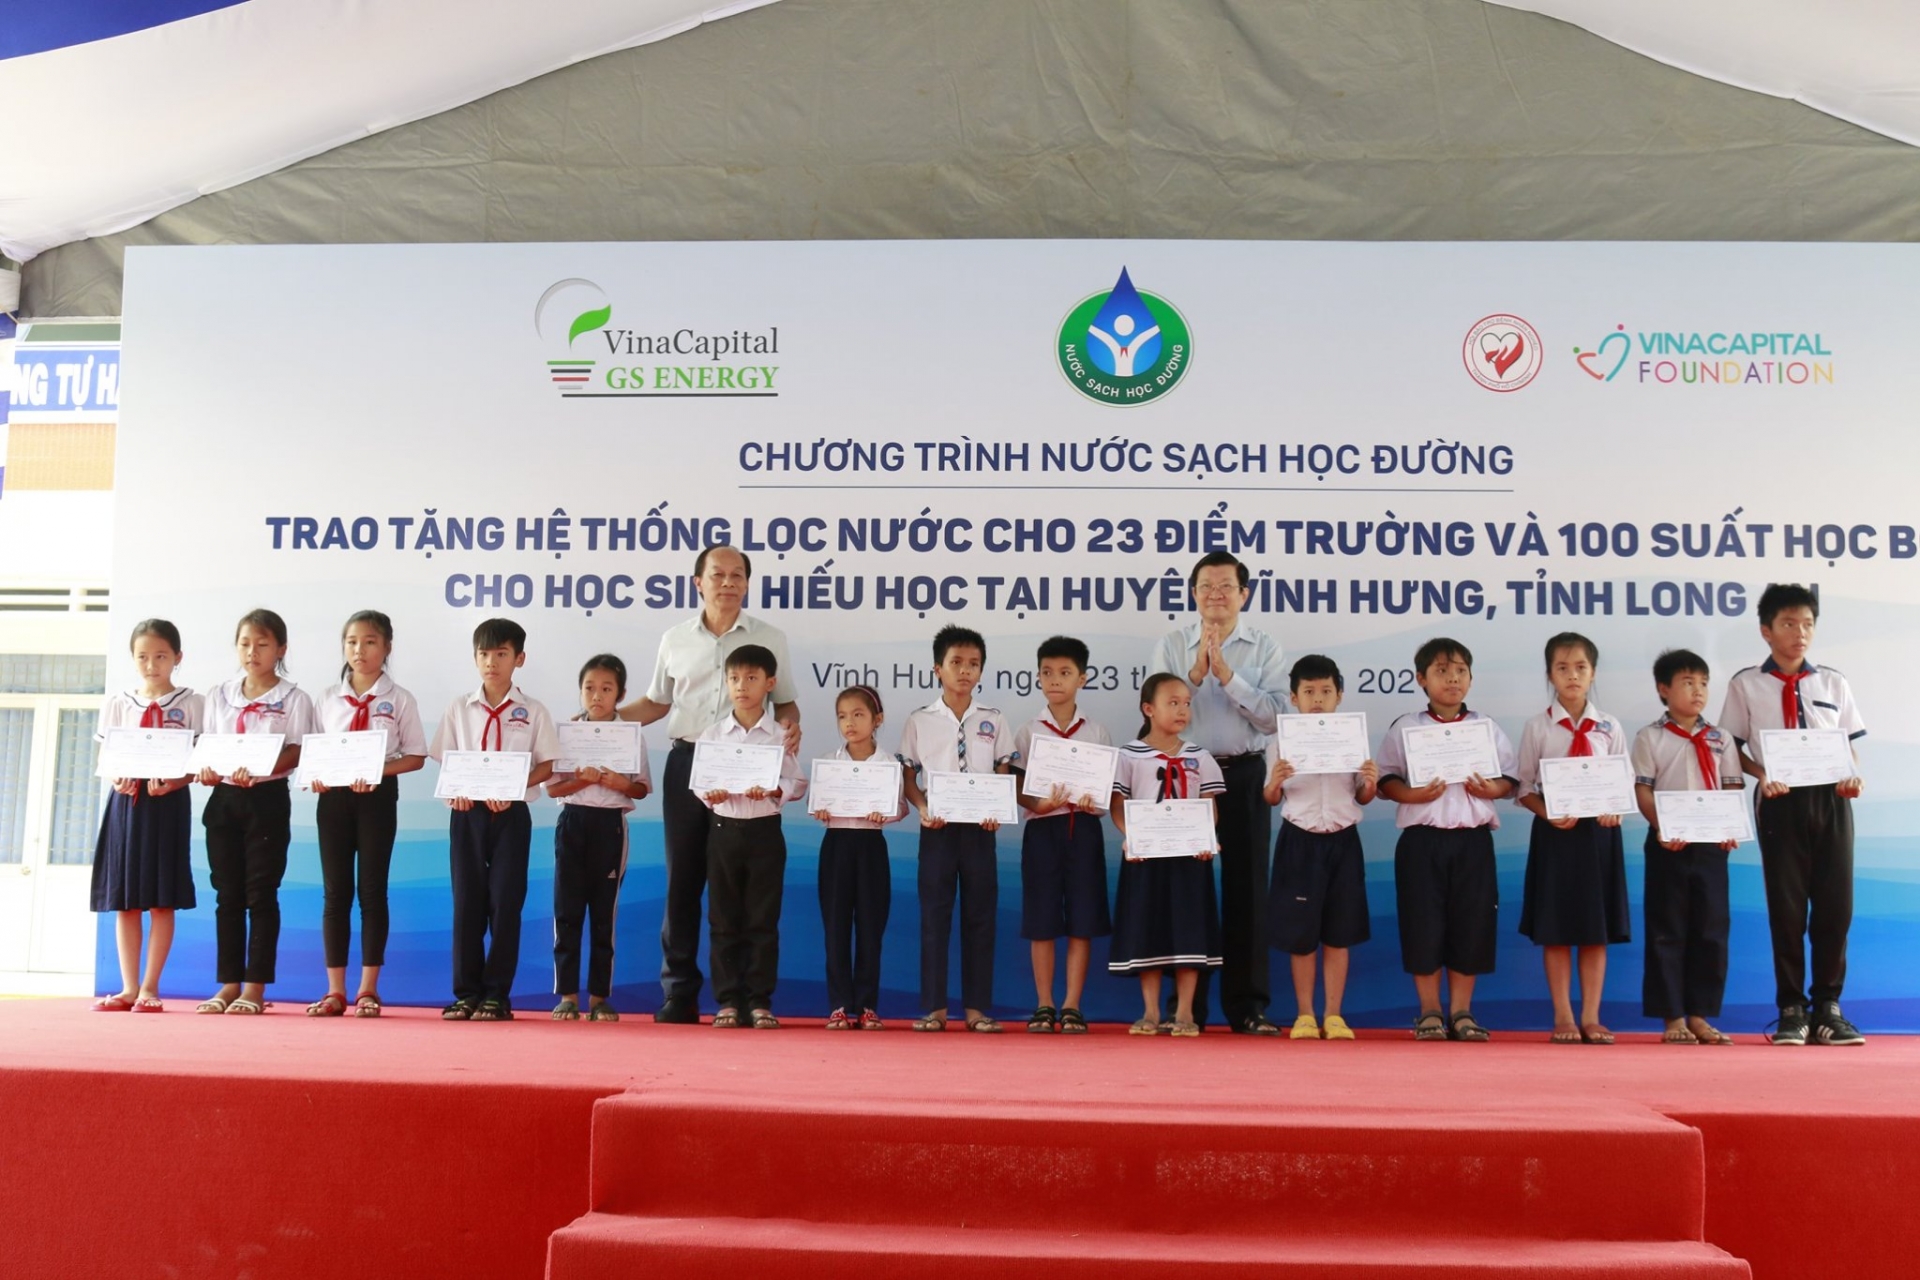 49 water filtrations and 100 scholarships granted to schools in remote rural area of Long An